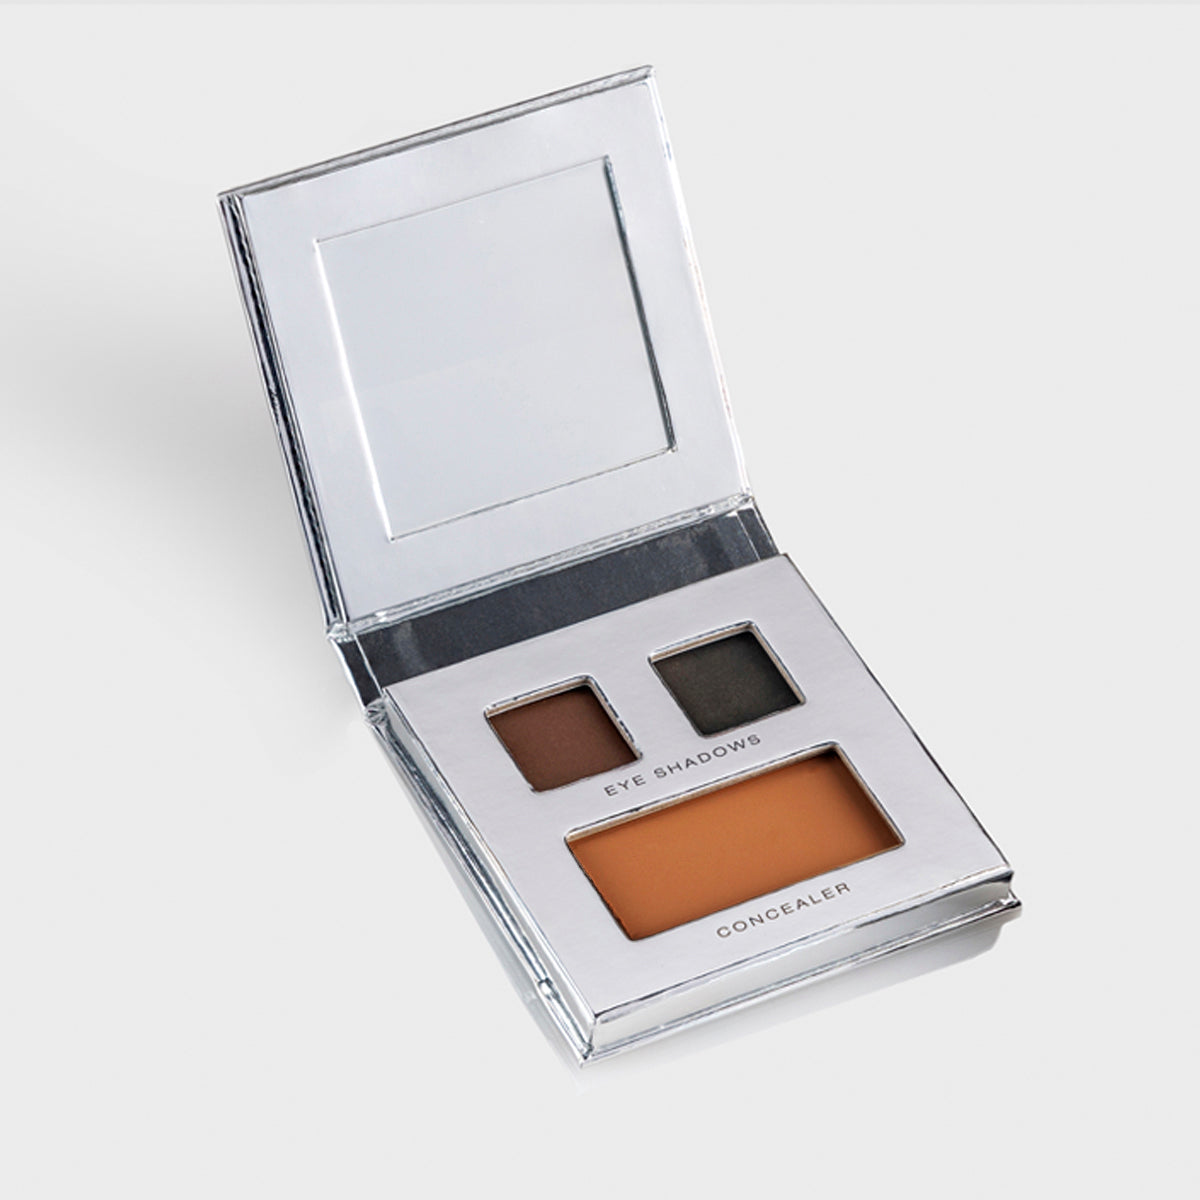 Fold Out Eyes Palette with Brown & Black Eyeshadow with concealer. Includes a mirror. In Shade Butter Pecan.